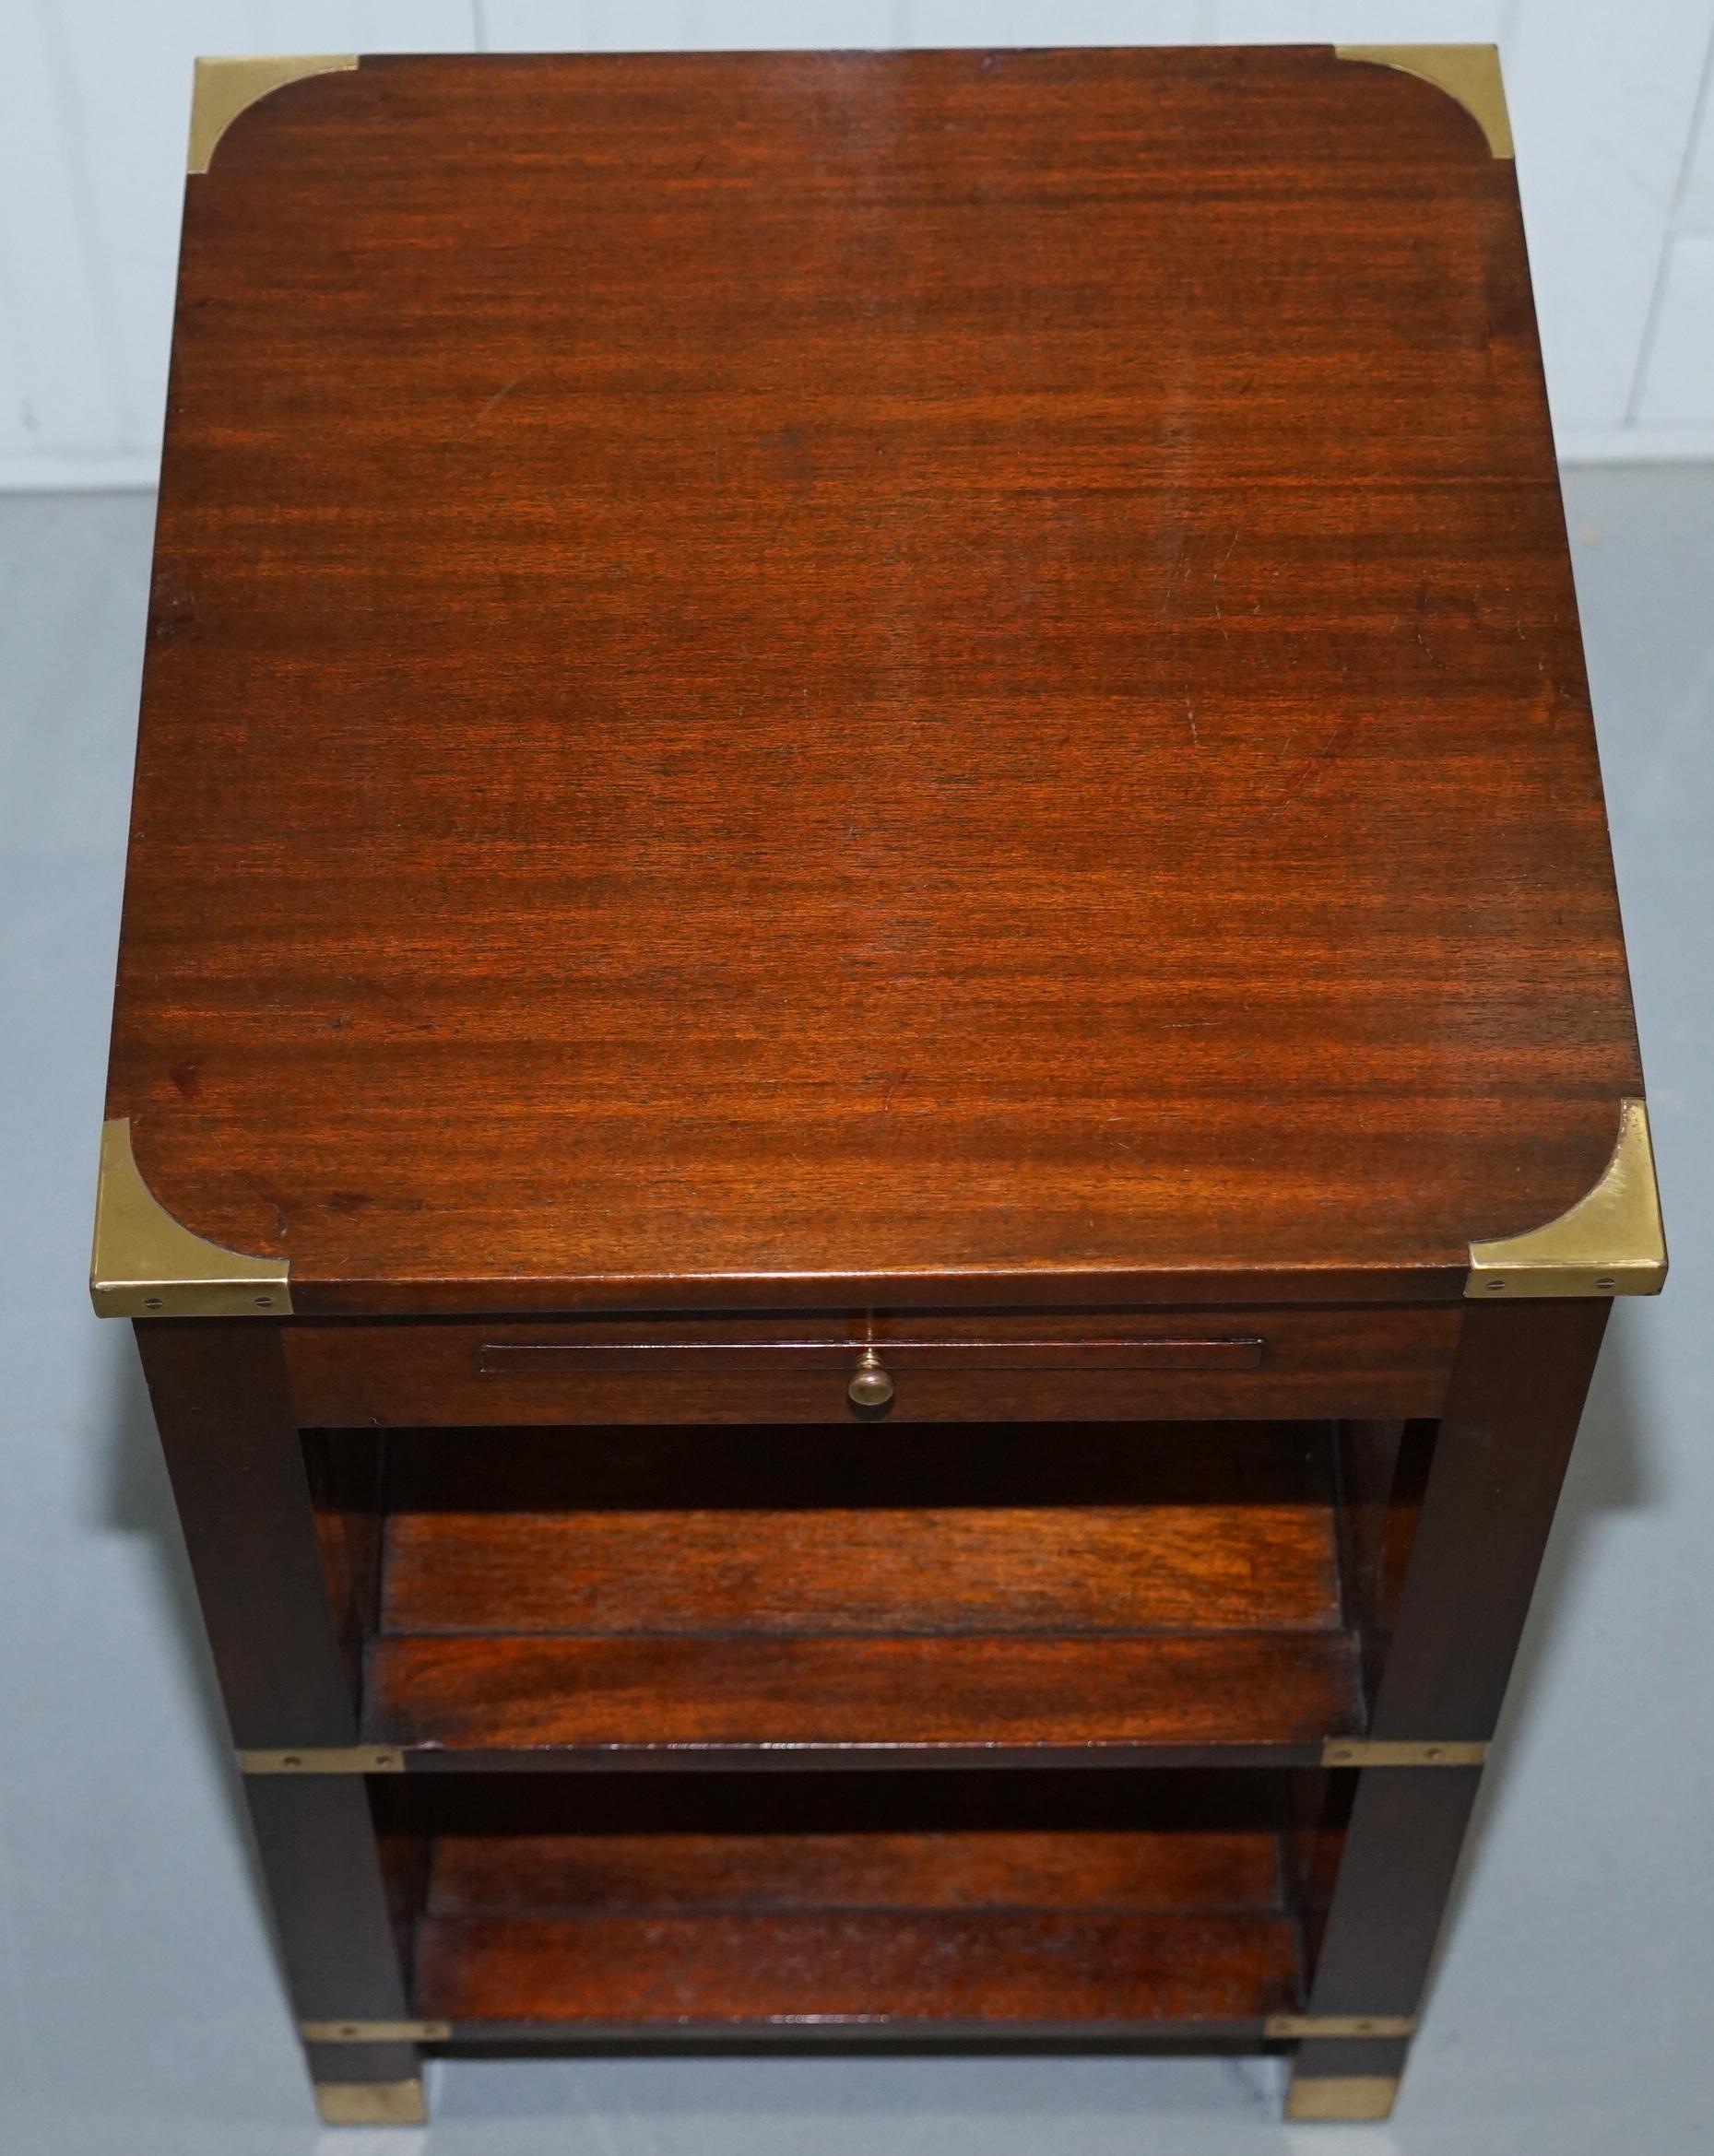 English Harrods London Kennedy Furniture Side End Lamp Table with Leather Butlers Tray